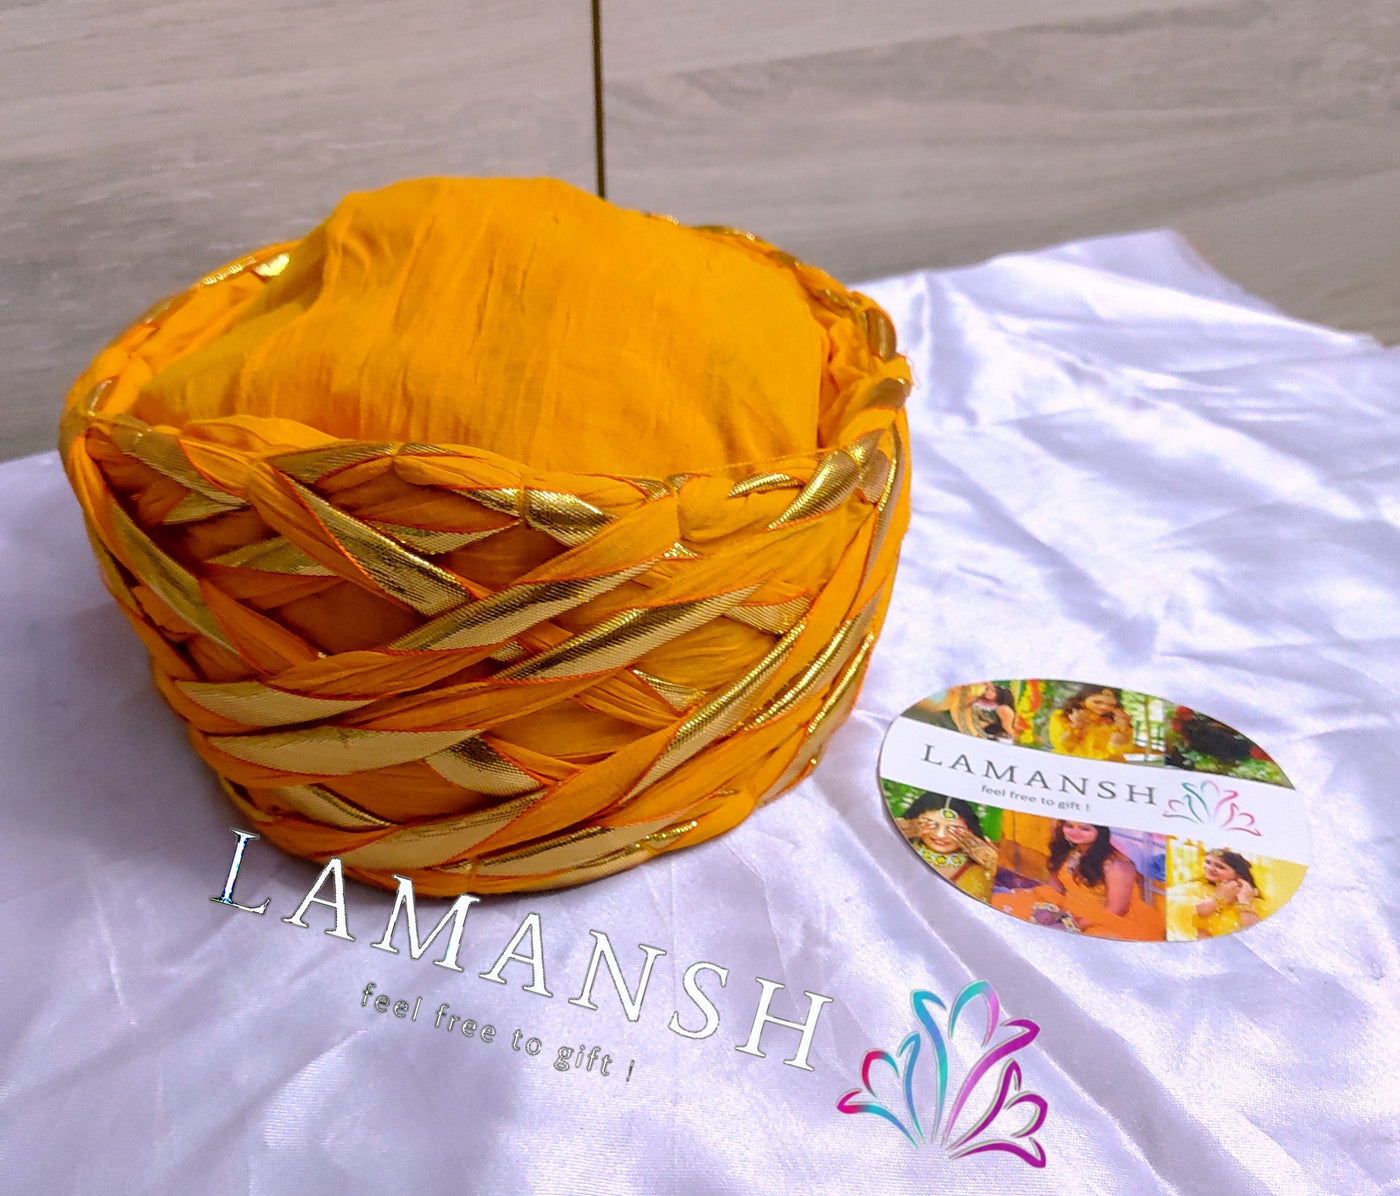 LAMANSH safa pagdi Pack of 10 LAMANSH Pack of 10 Rajasthani Style Readymade Safa Pagdi Turbans for Guests entry welcome in Hotels & Resorts ( Assorted colors )